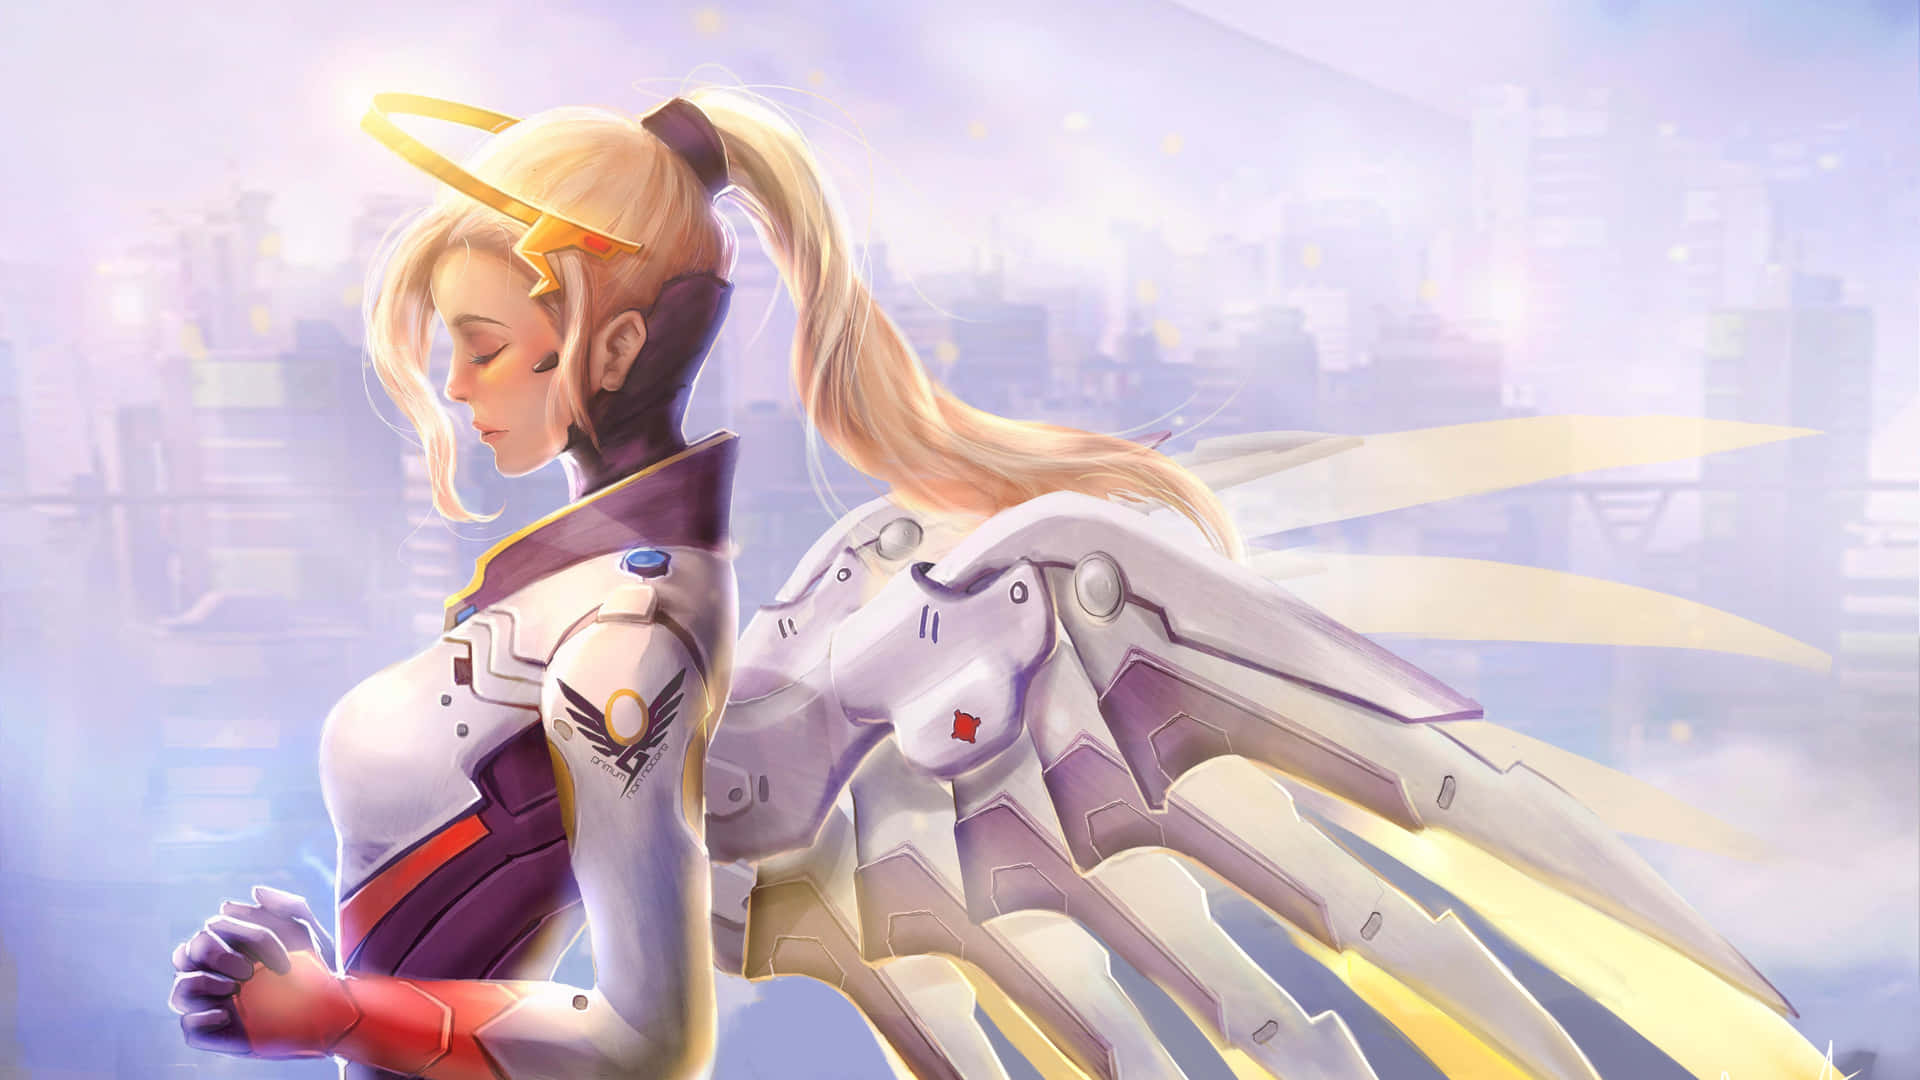 Soaring High - Overwatch Mercy In Action Background